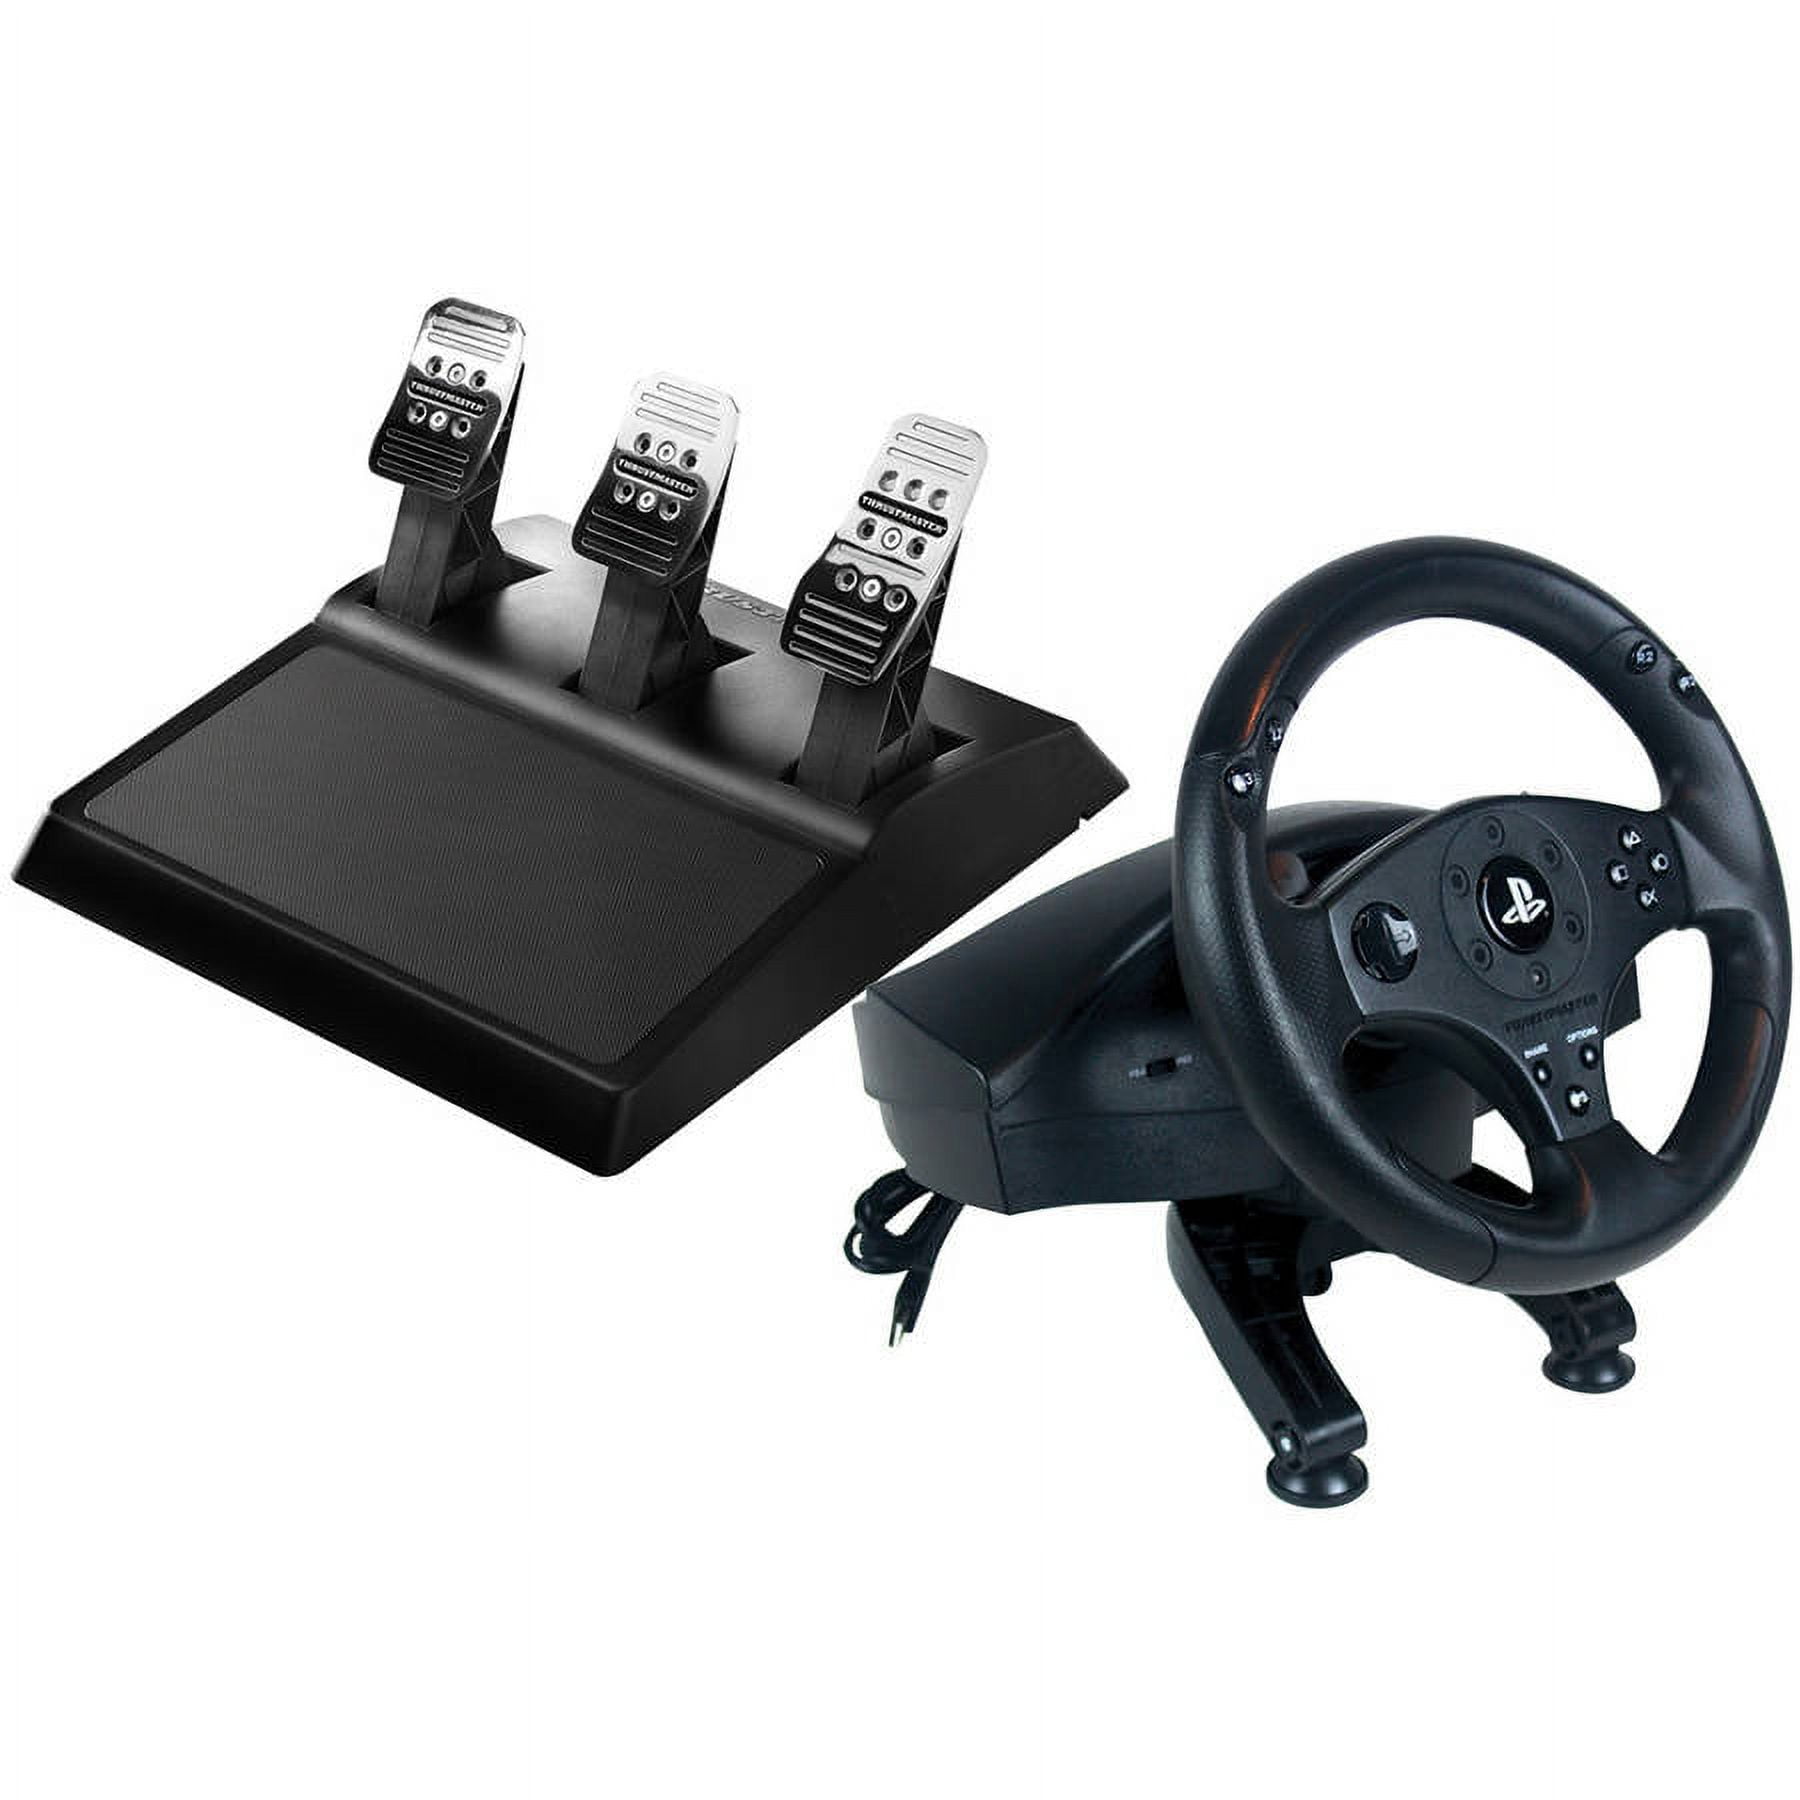  Thrustmaster 4060056 T3PA T300 Pedal Add-On - Not